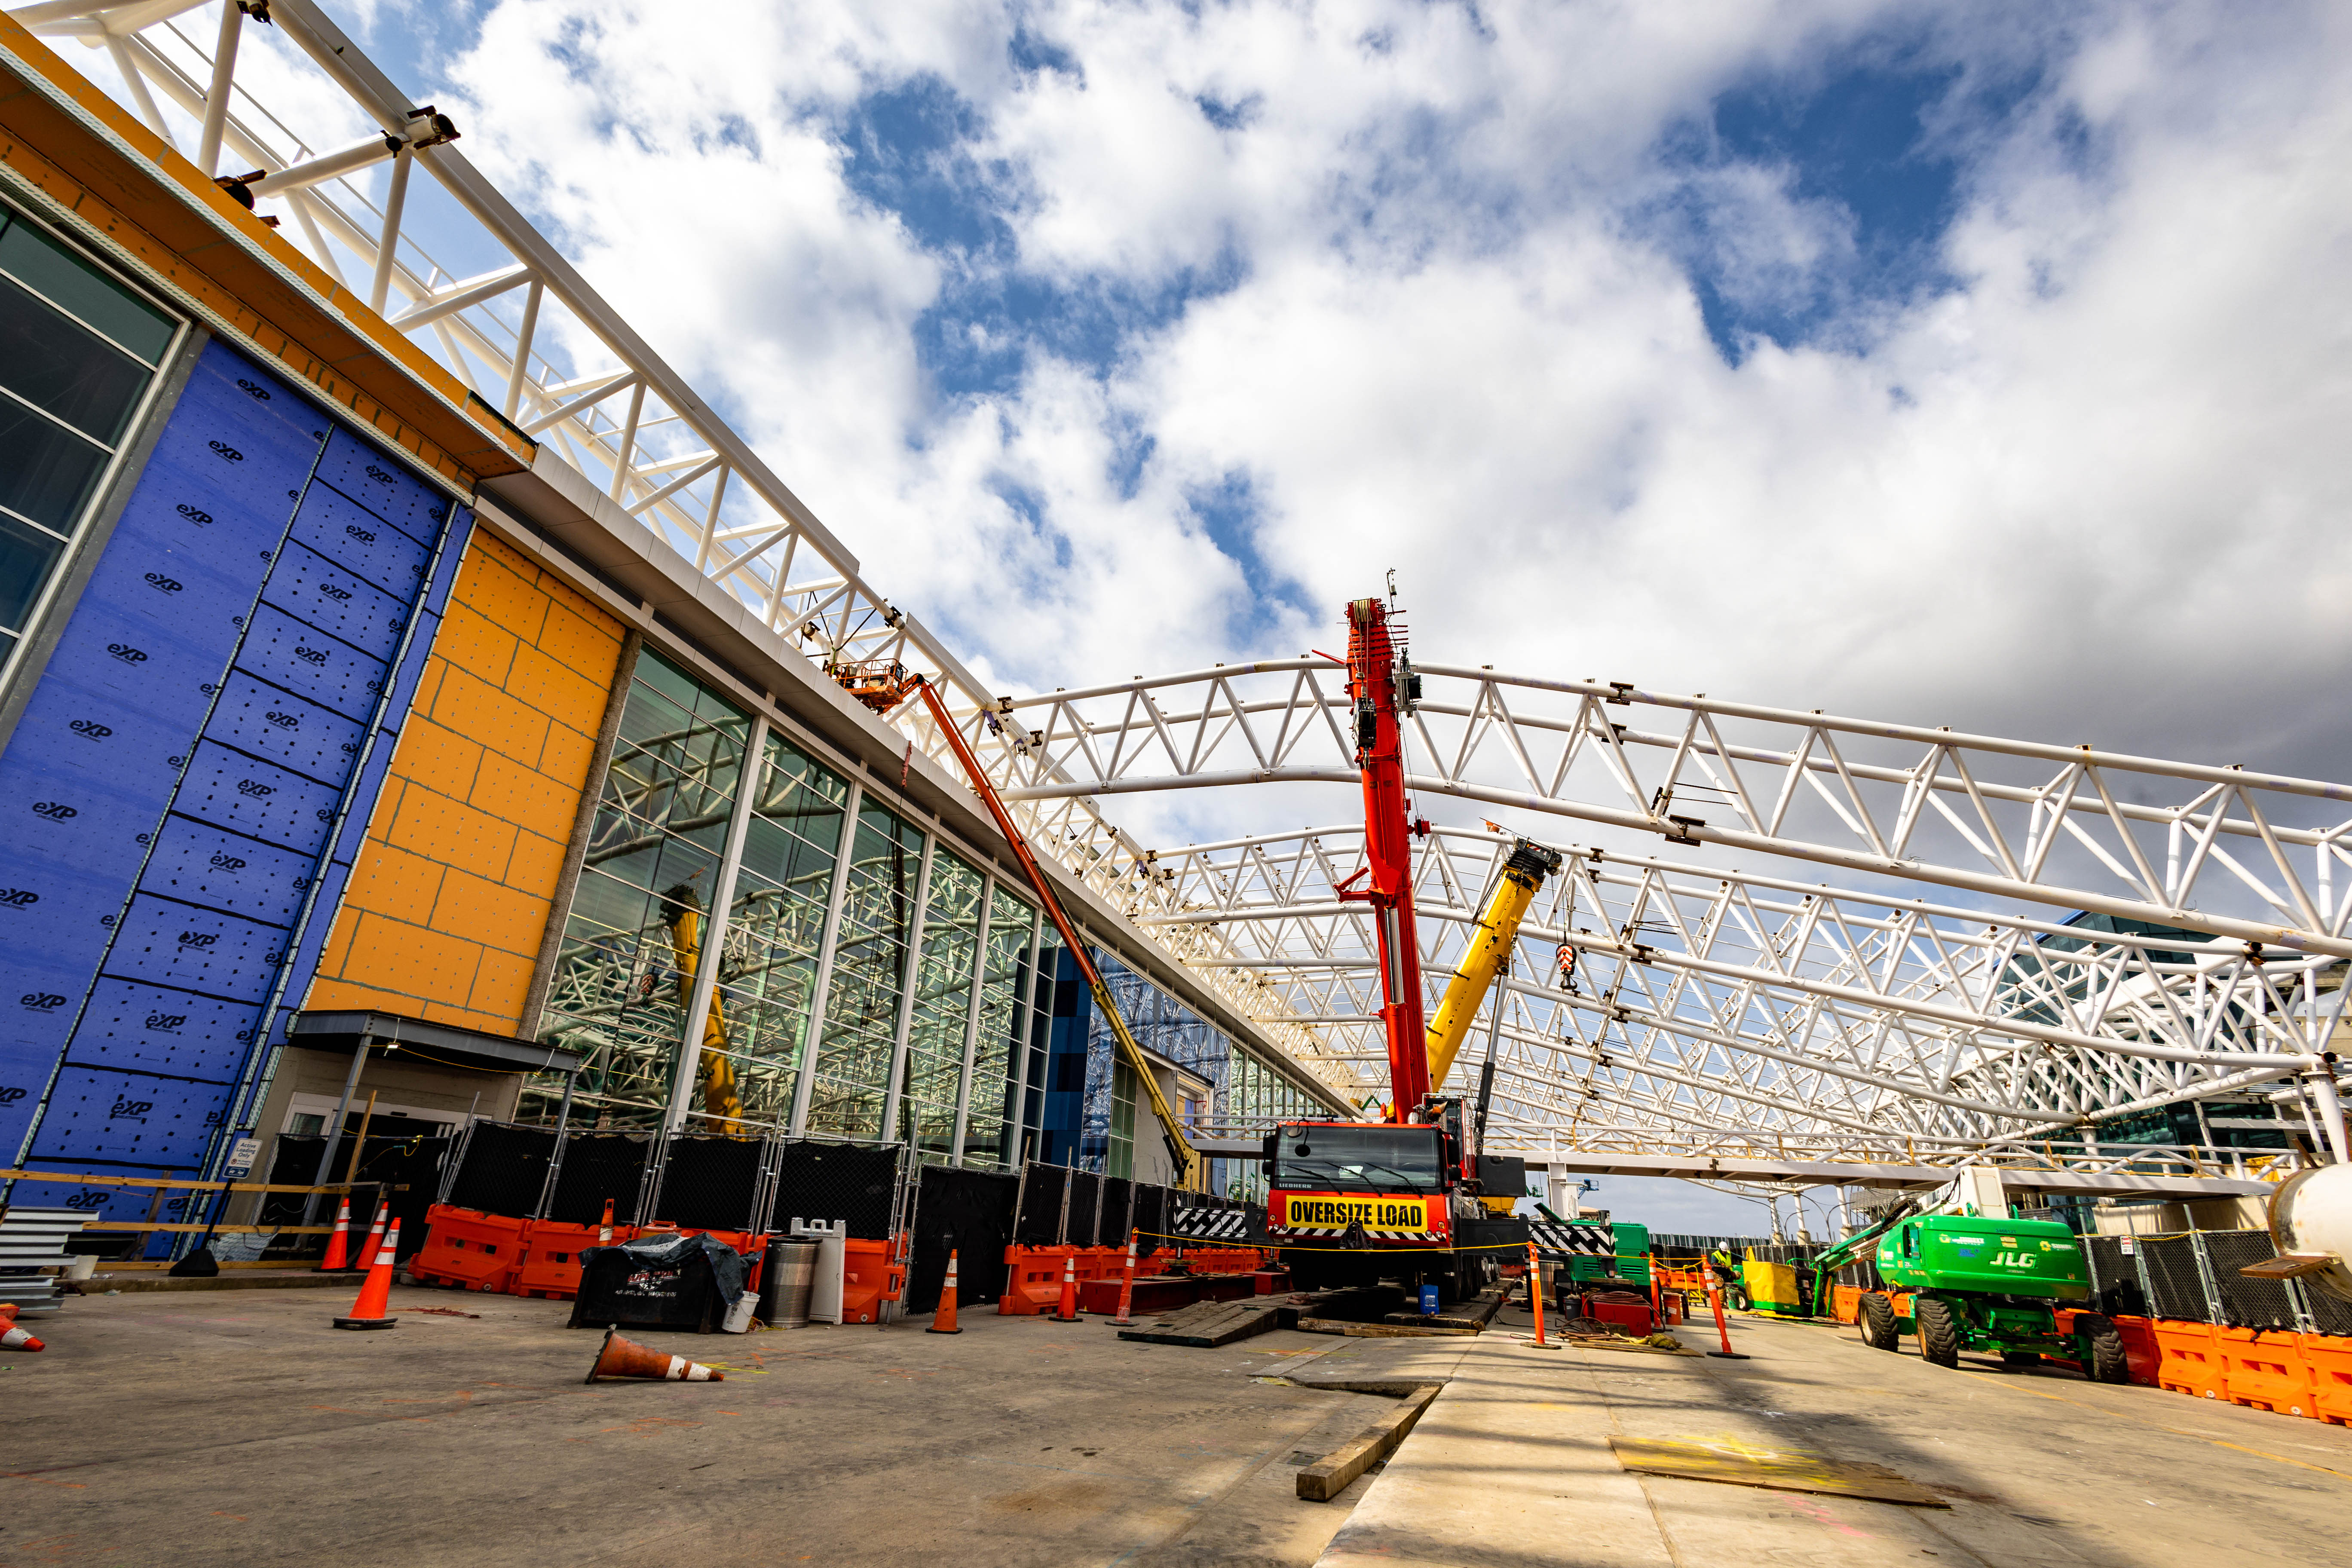 standing outside the terminal lobby the canopy of the upper roadway takes shape against a blue sky